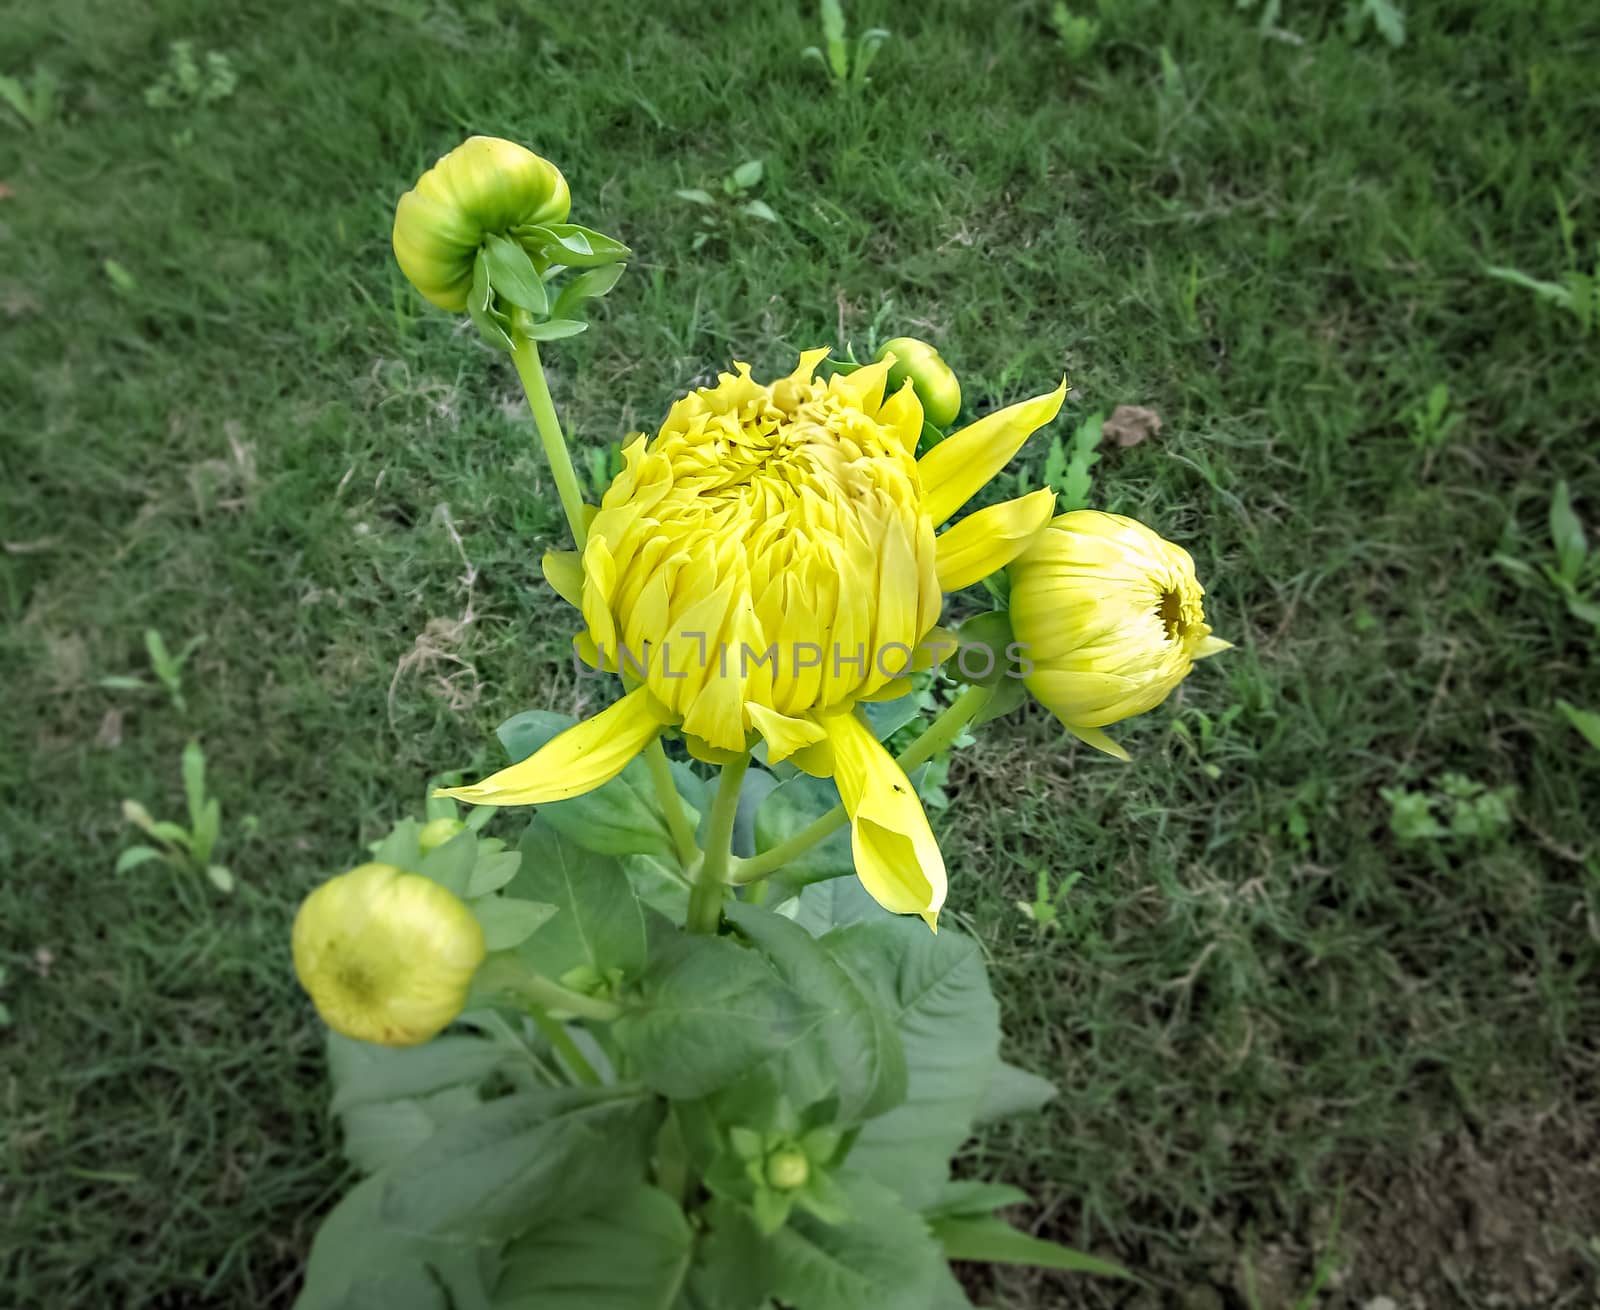 Selective focus, blur background, close up image of bright yellow blooming Dahlia flower bud in park with green background.